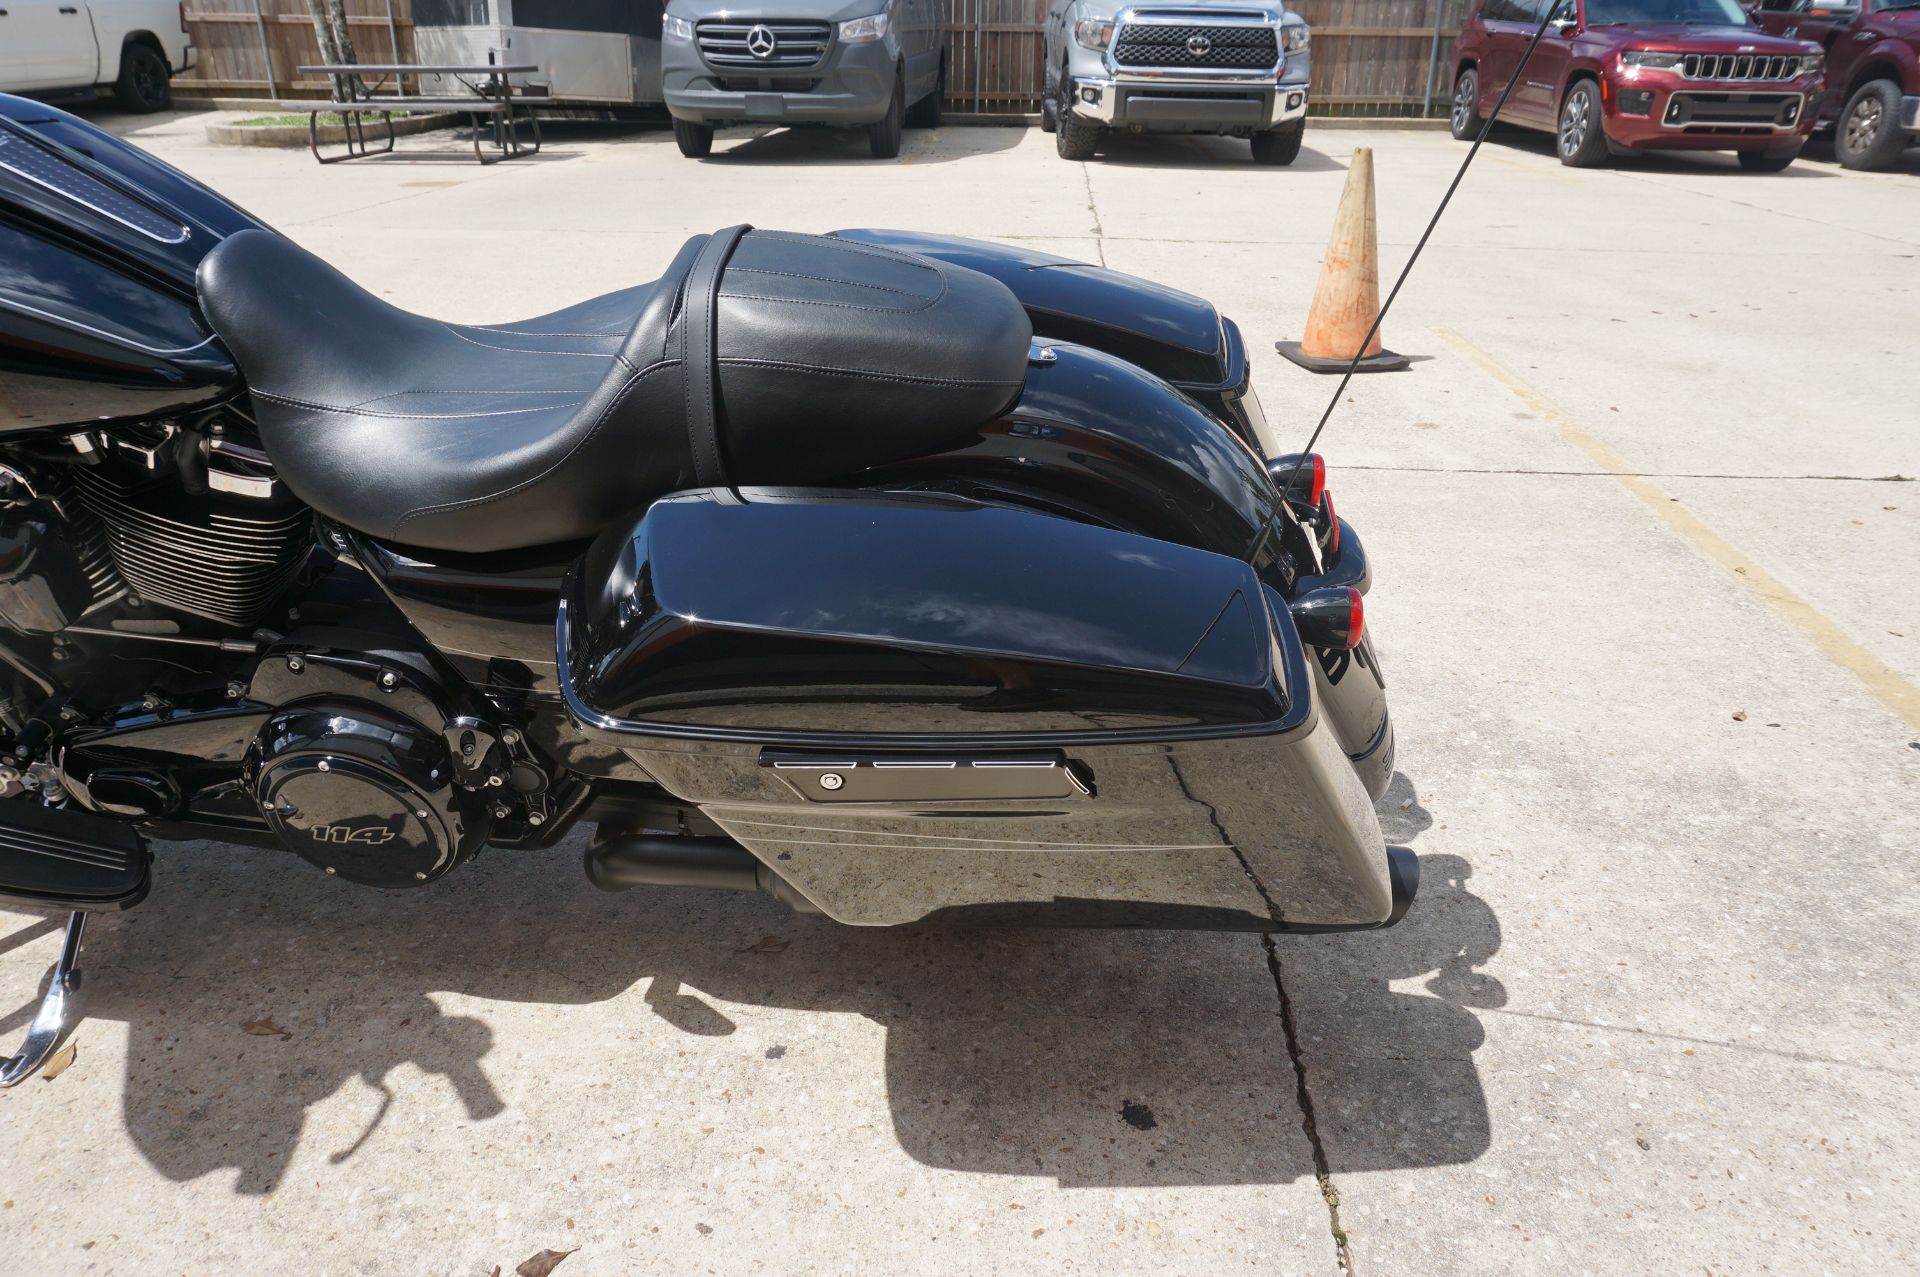 2020 Harley-Davidson Street Glide® Special in Metairie, Louisiana - Photo 9